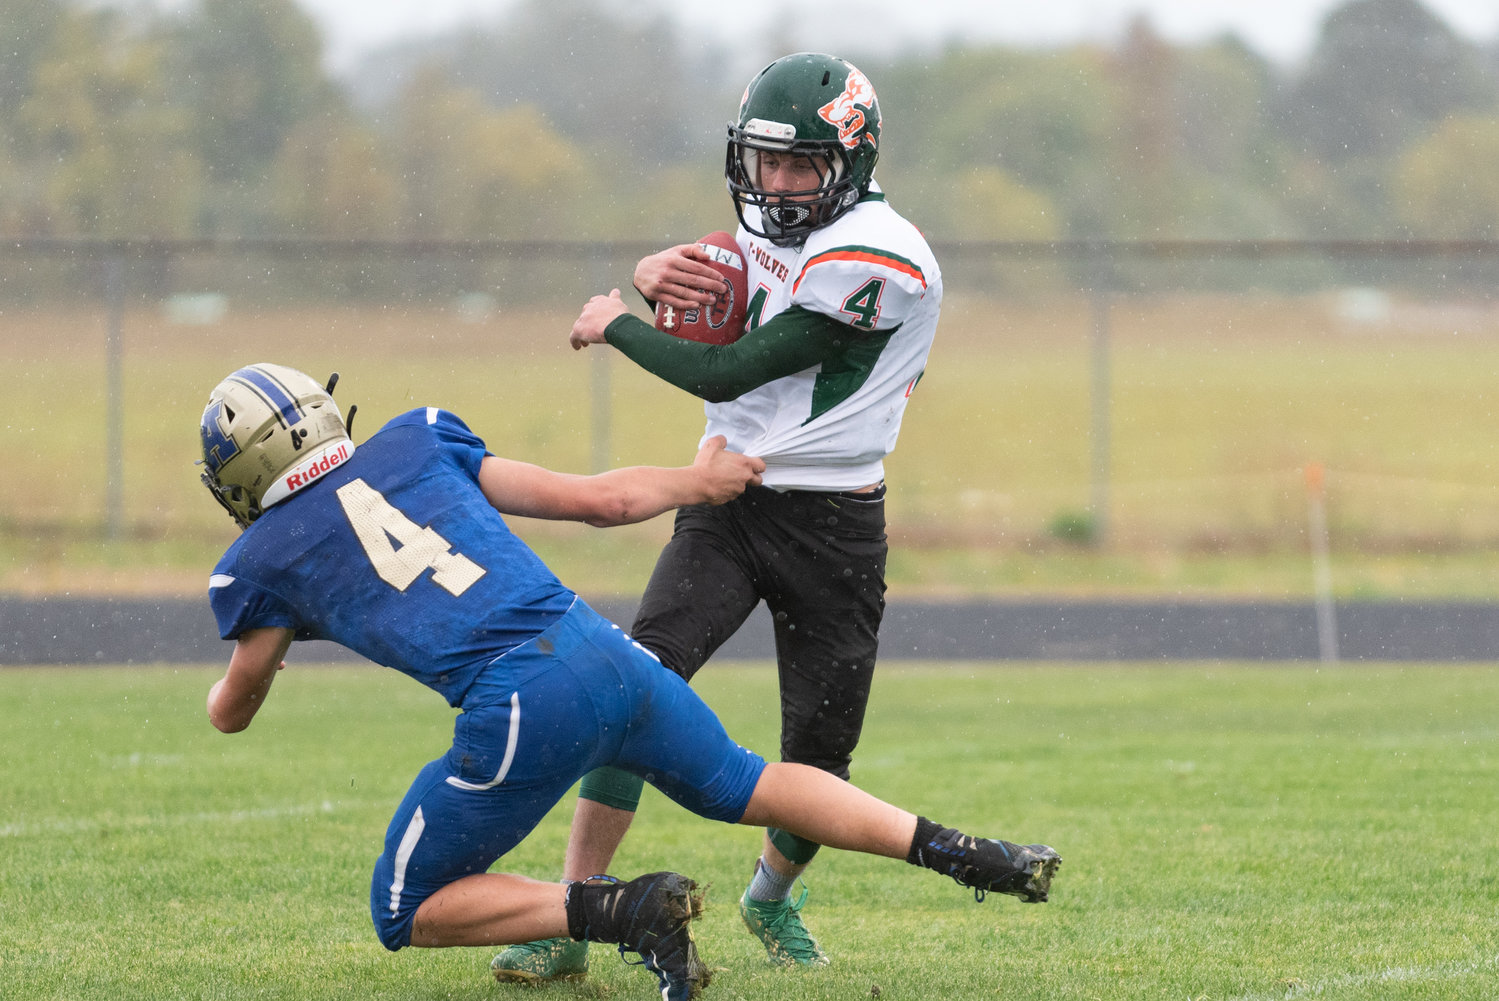 MWP quarterback Layten Collette eludes a tackler in the Timberwolves loss to Adna Saturday afternoon.